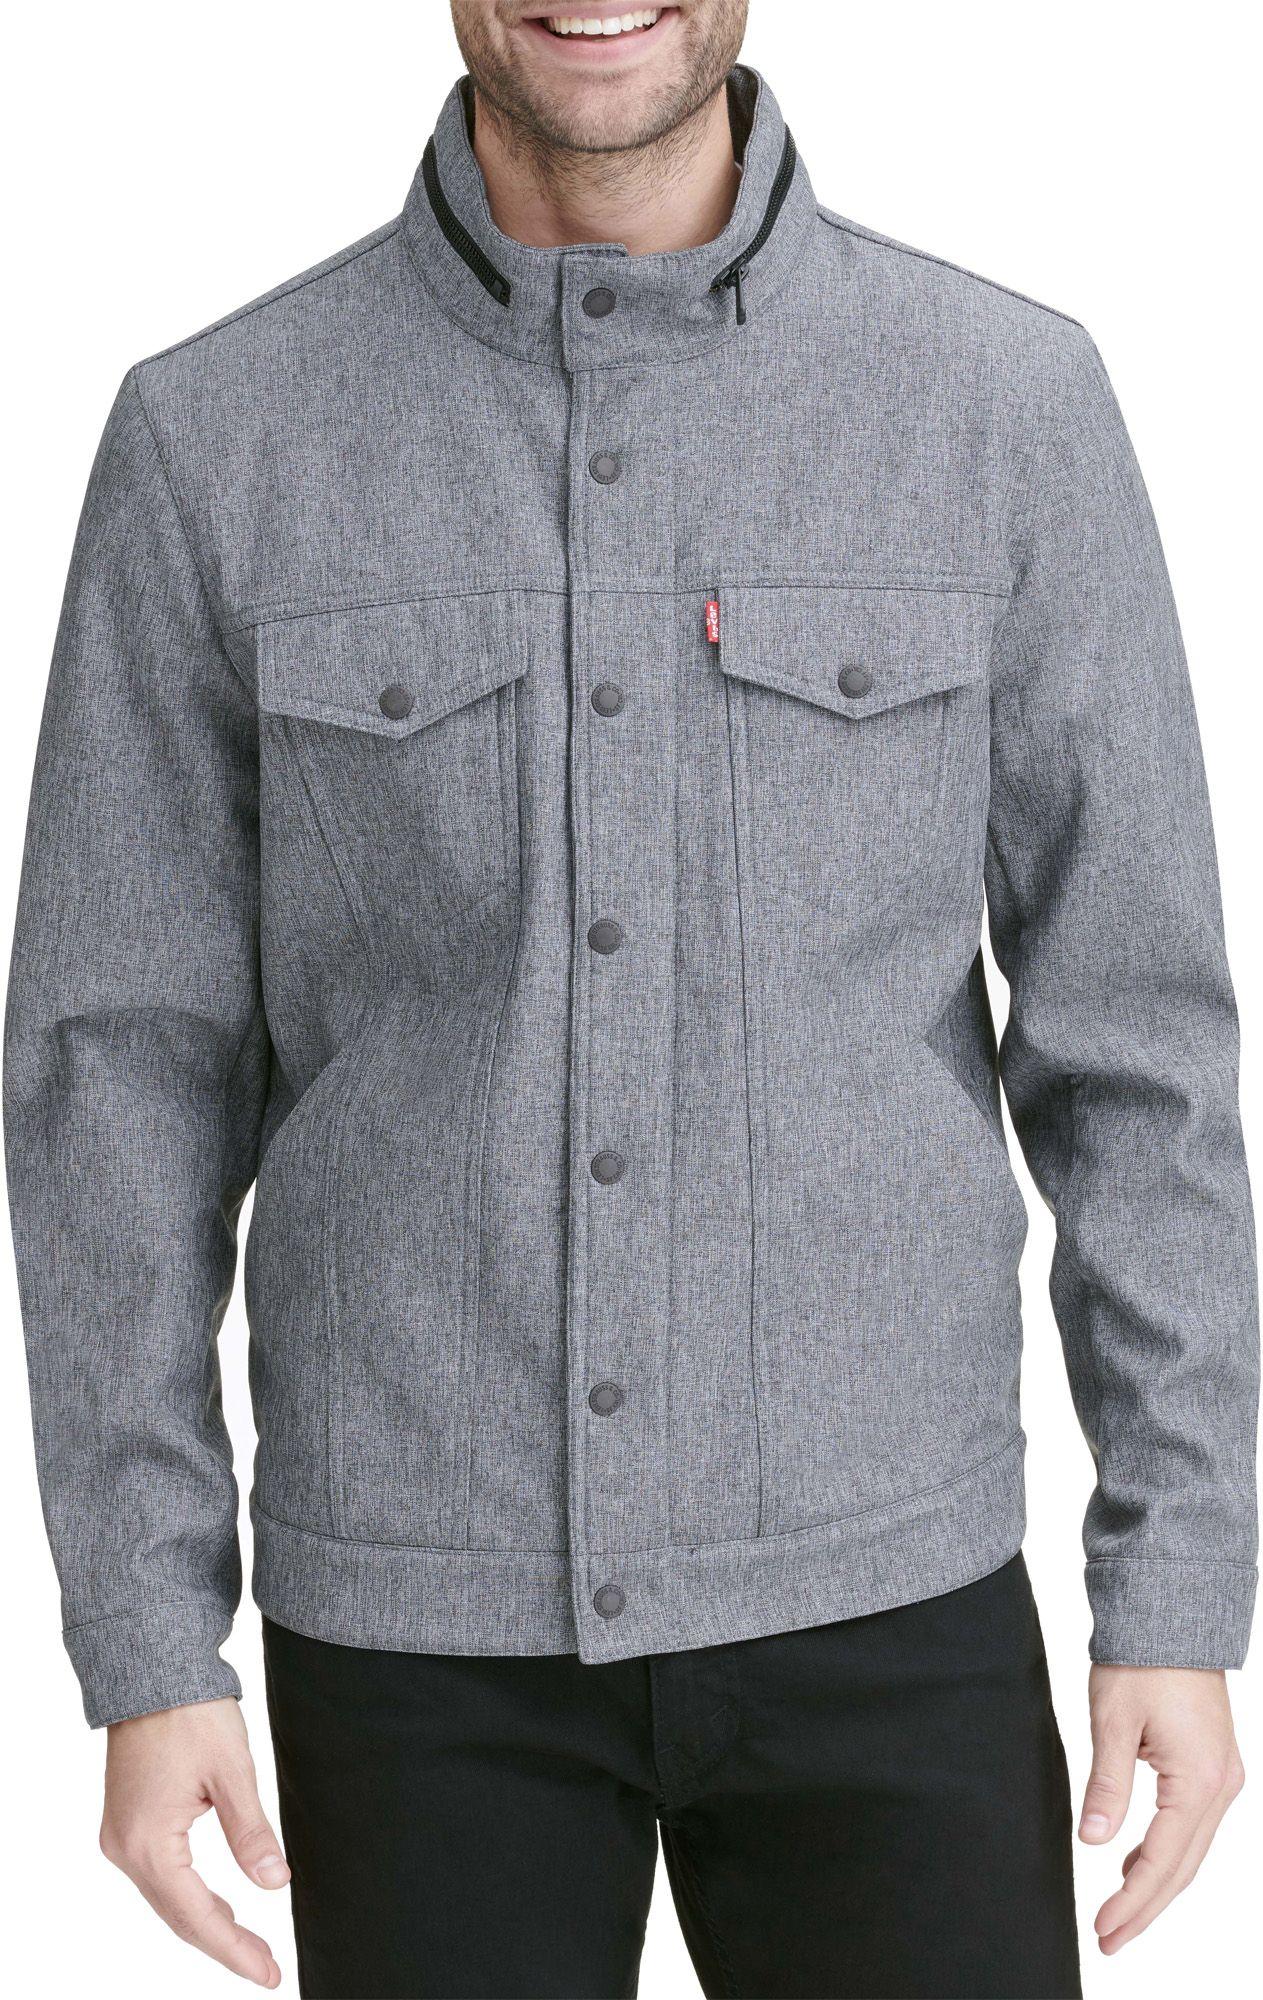 Levi's Softshell Commuter Jacket in Heather Grey (Gray) for Men - Lyst